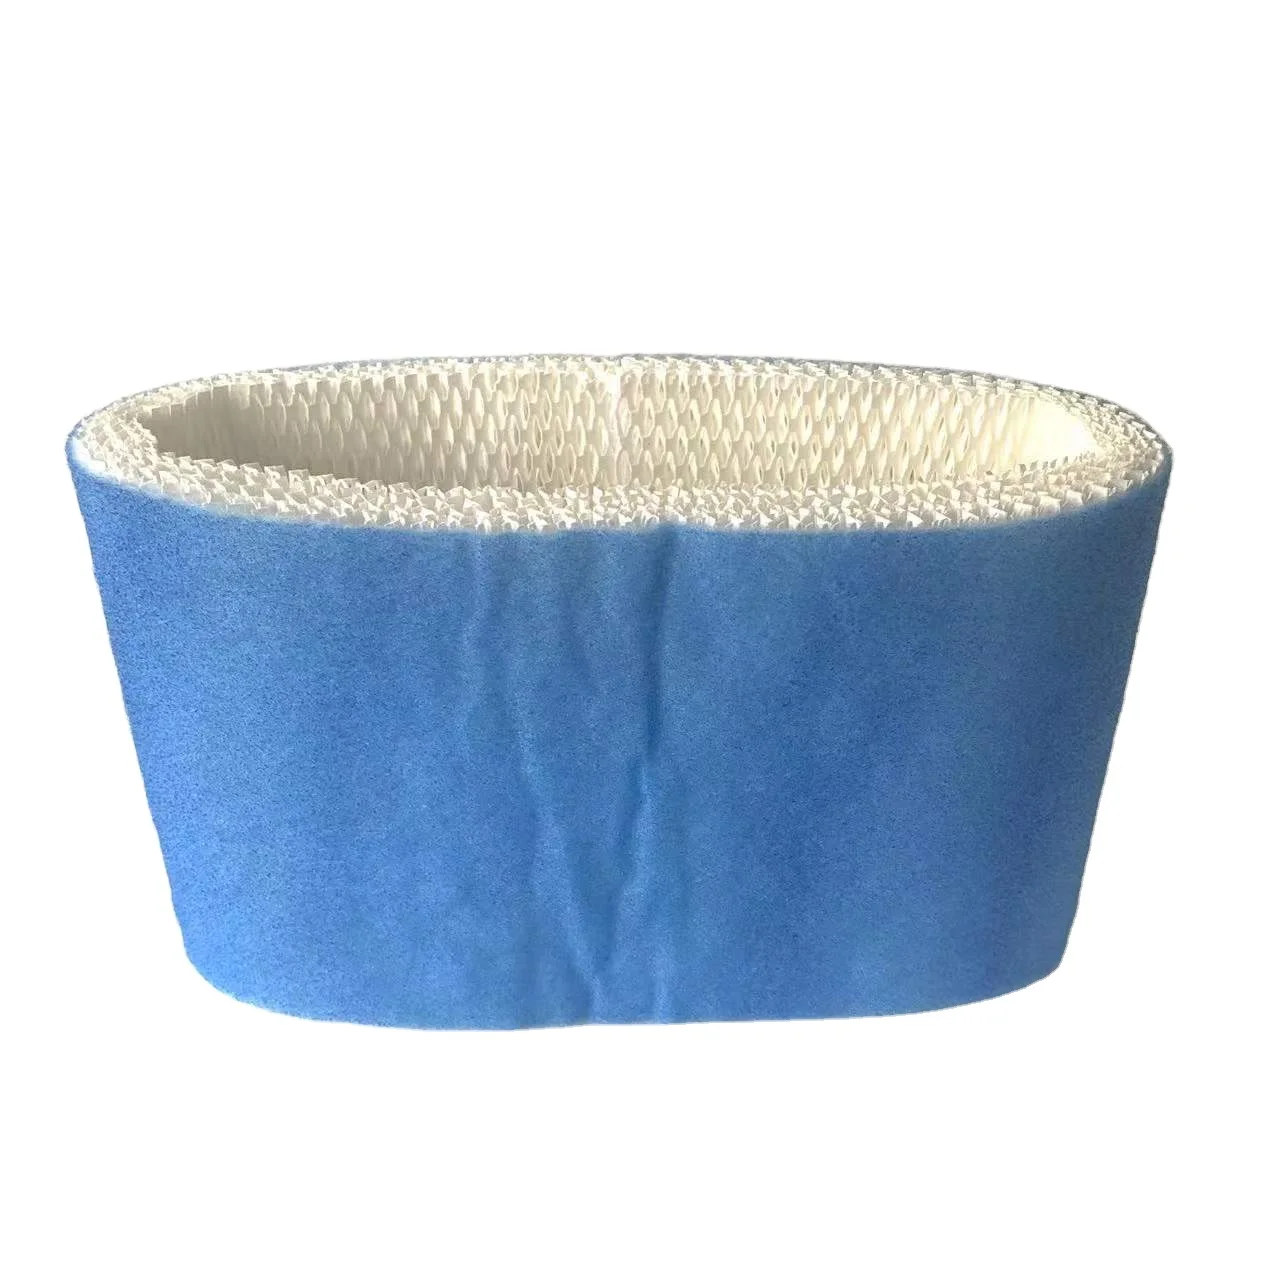 HC-14 Humidifier Wicking Filter E for Honeywell HCM-6009 HCM-6011 HEV680 HEV685 Series HC-14V1 HC-14 Humidifier parts